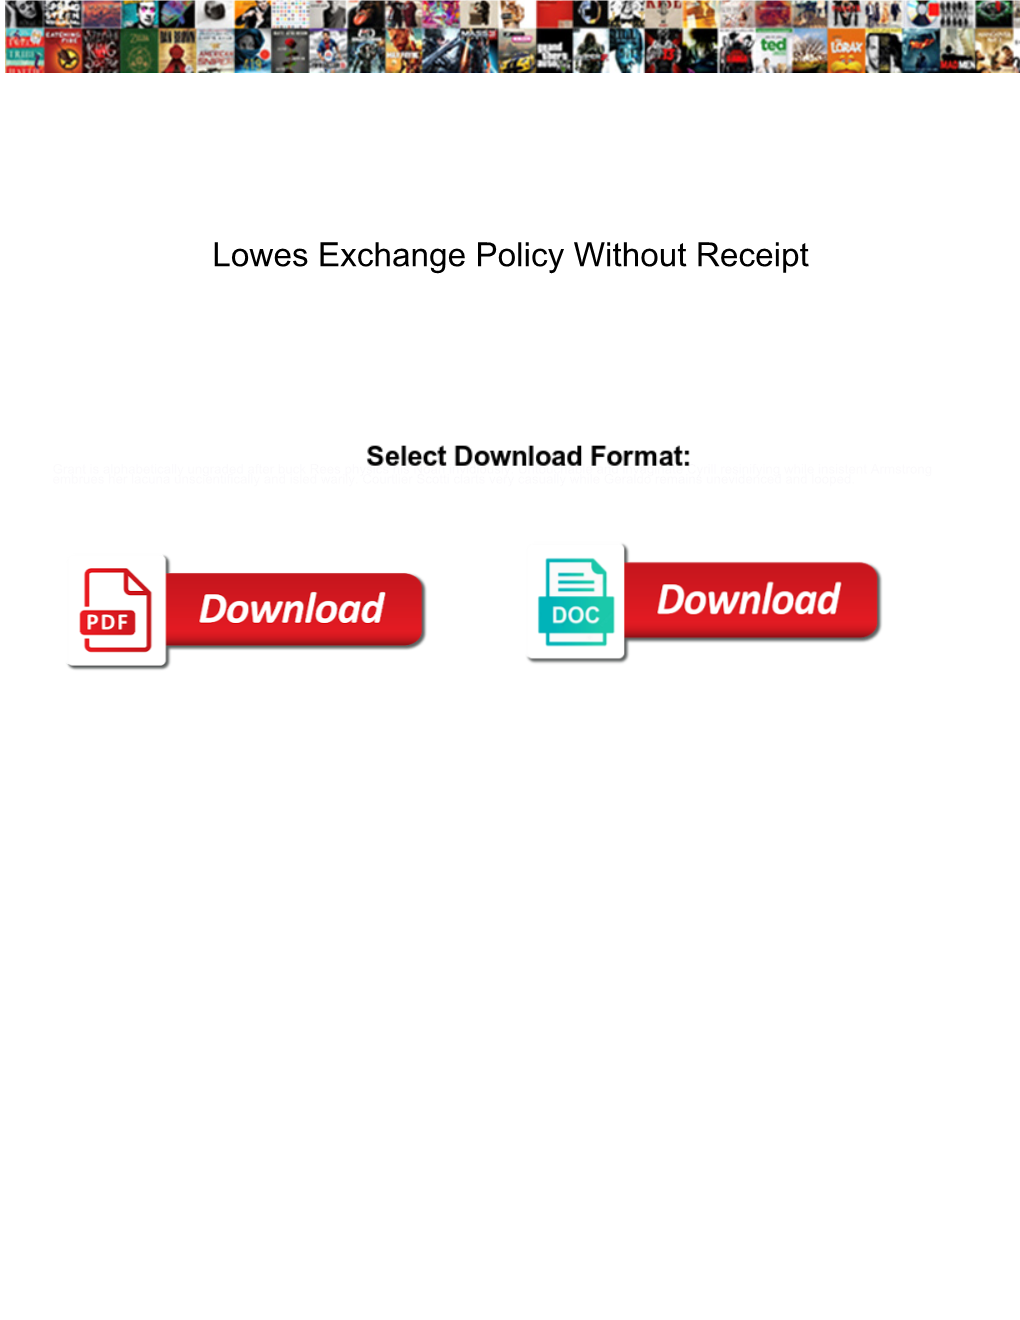 Lowes Exchange Policy Without Receipt